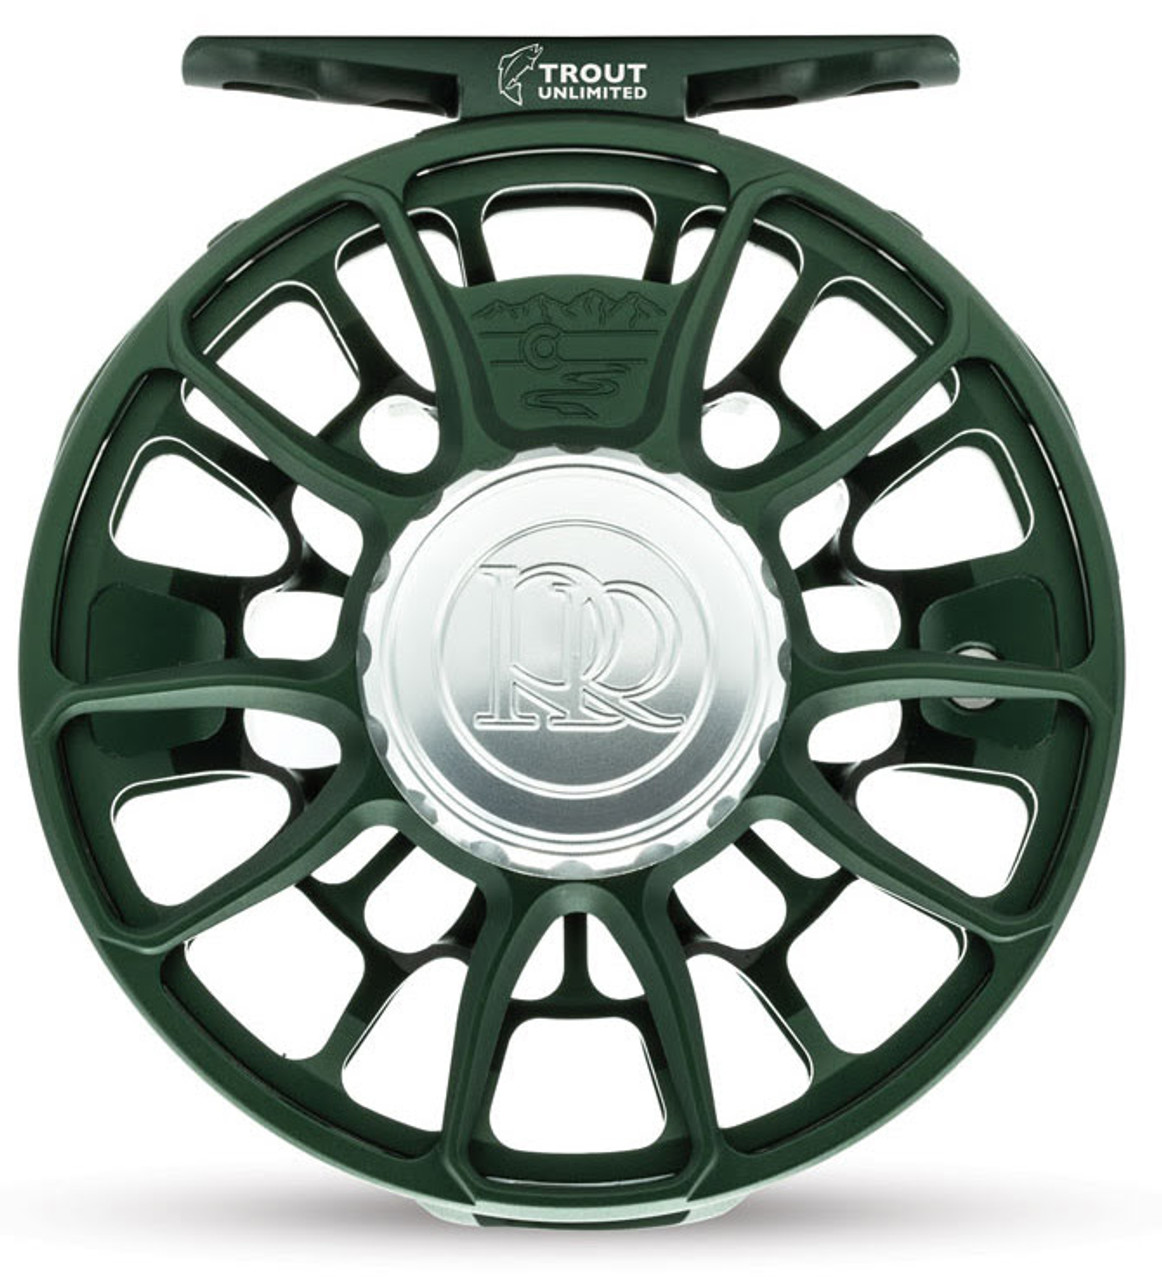 Ross Animas Fly Reel - 5-6WT - Trout Unlimited Edition - Made in USA - Ed's  Fly Shop